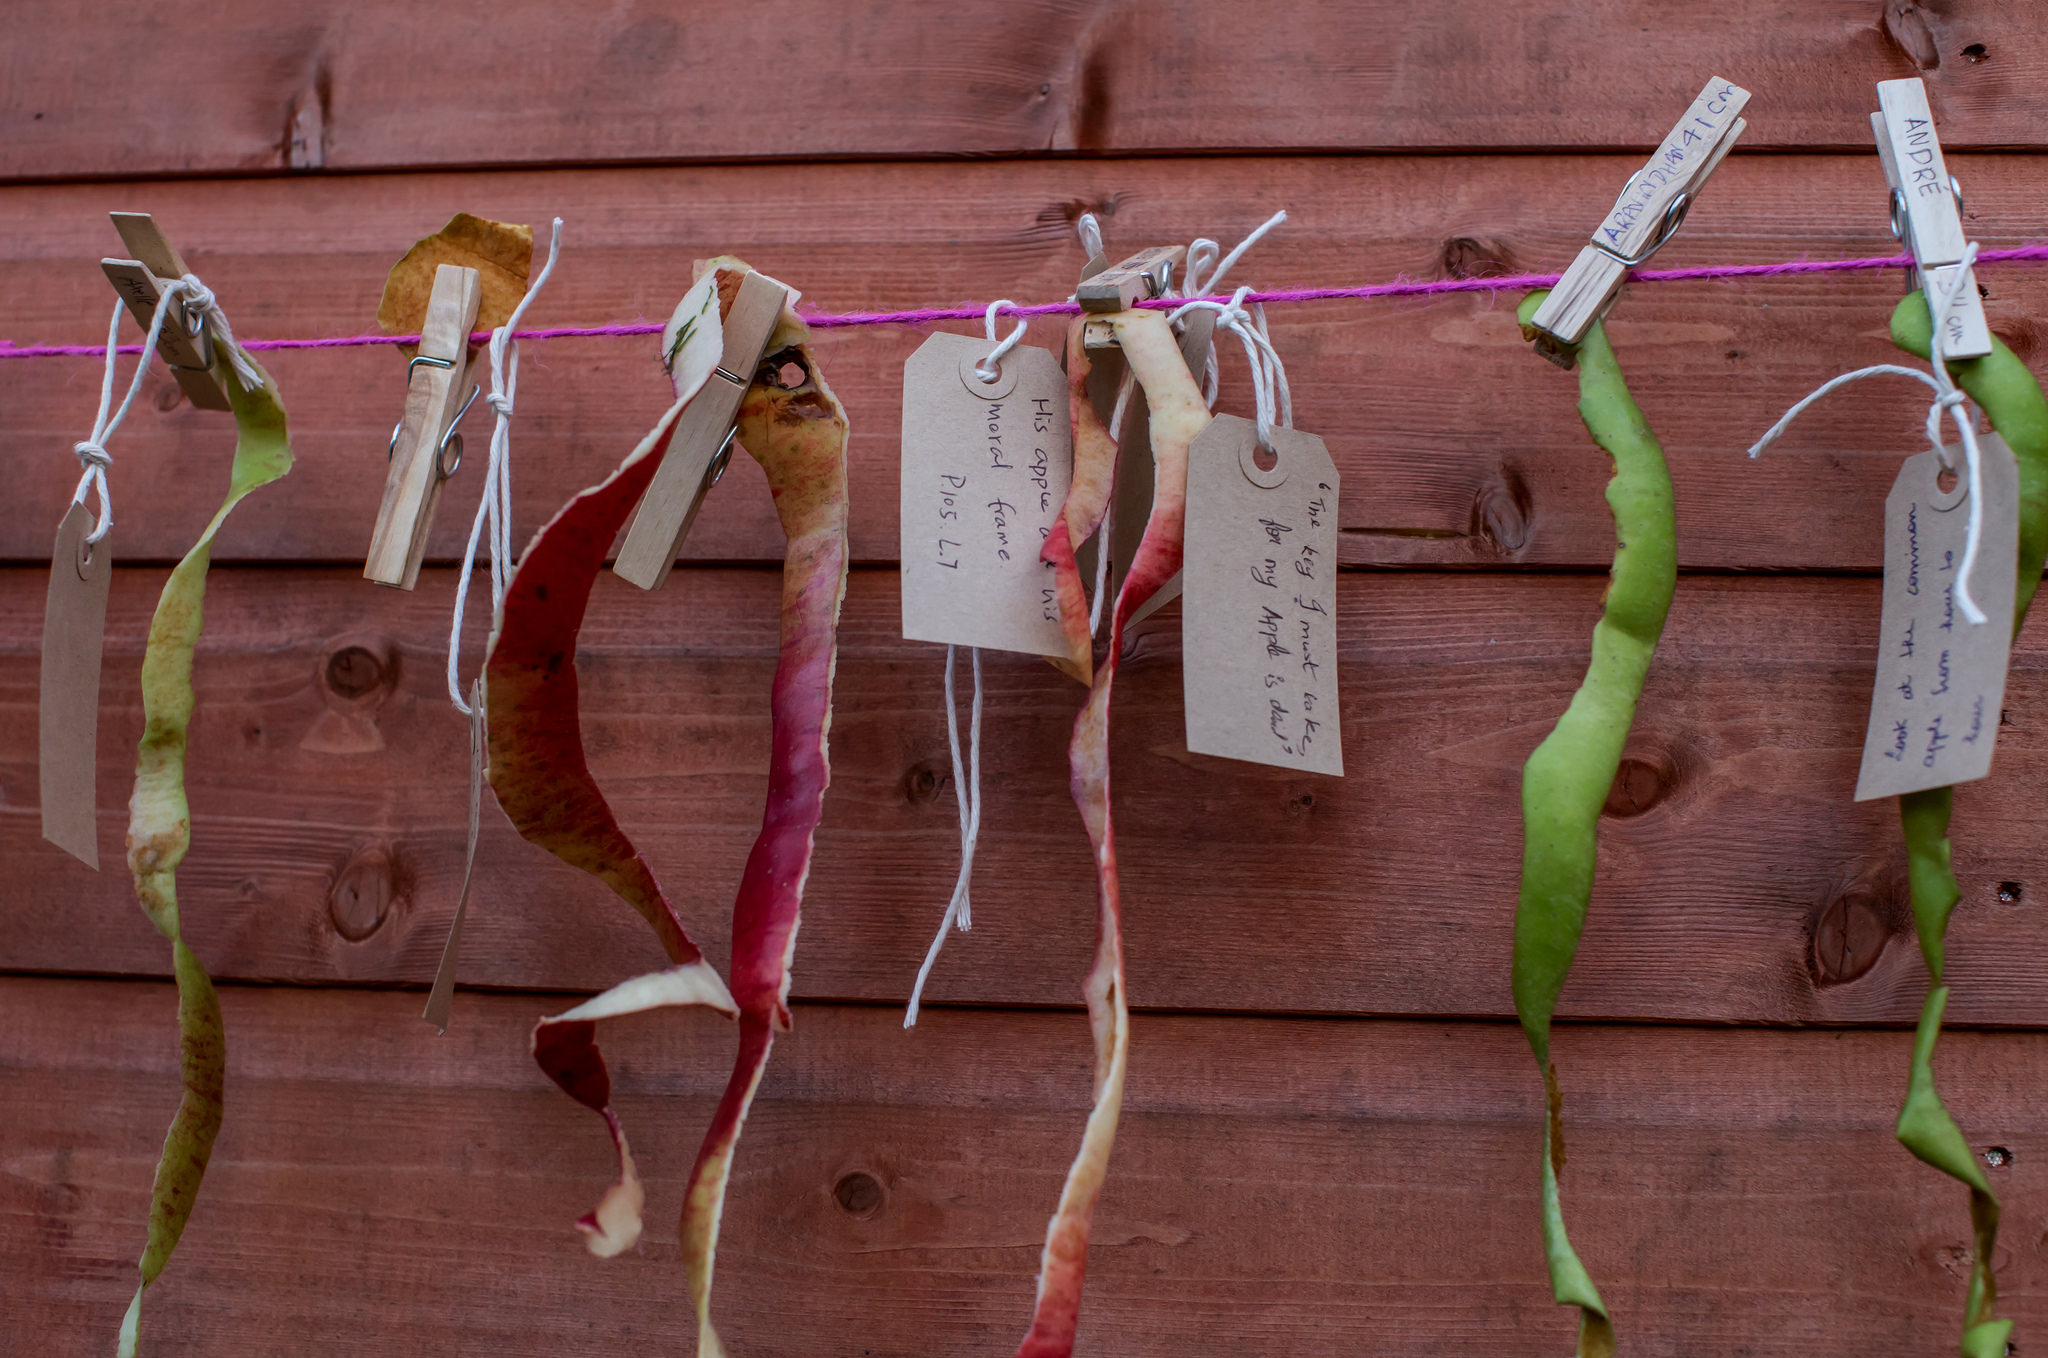 Apple peels and poems hanging from a string using clothes pegs